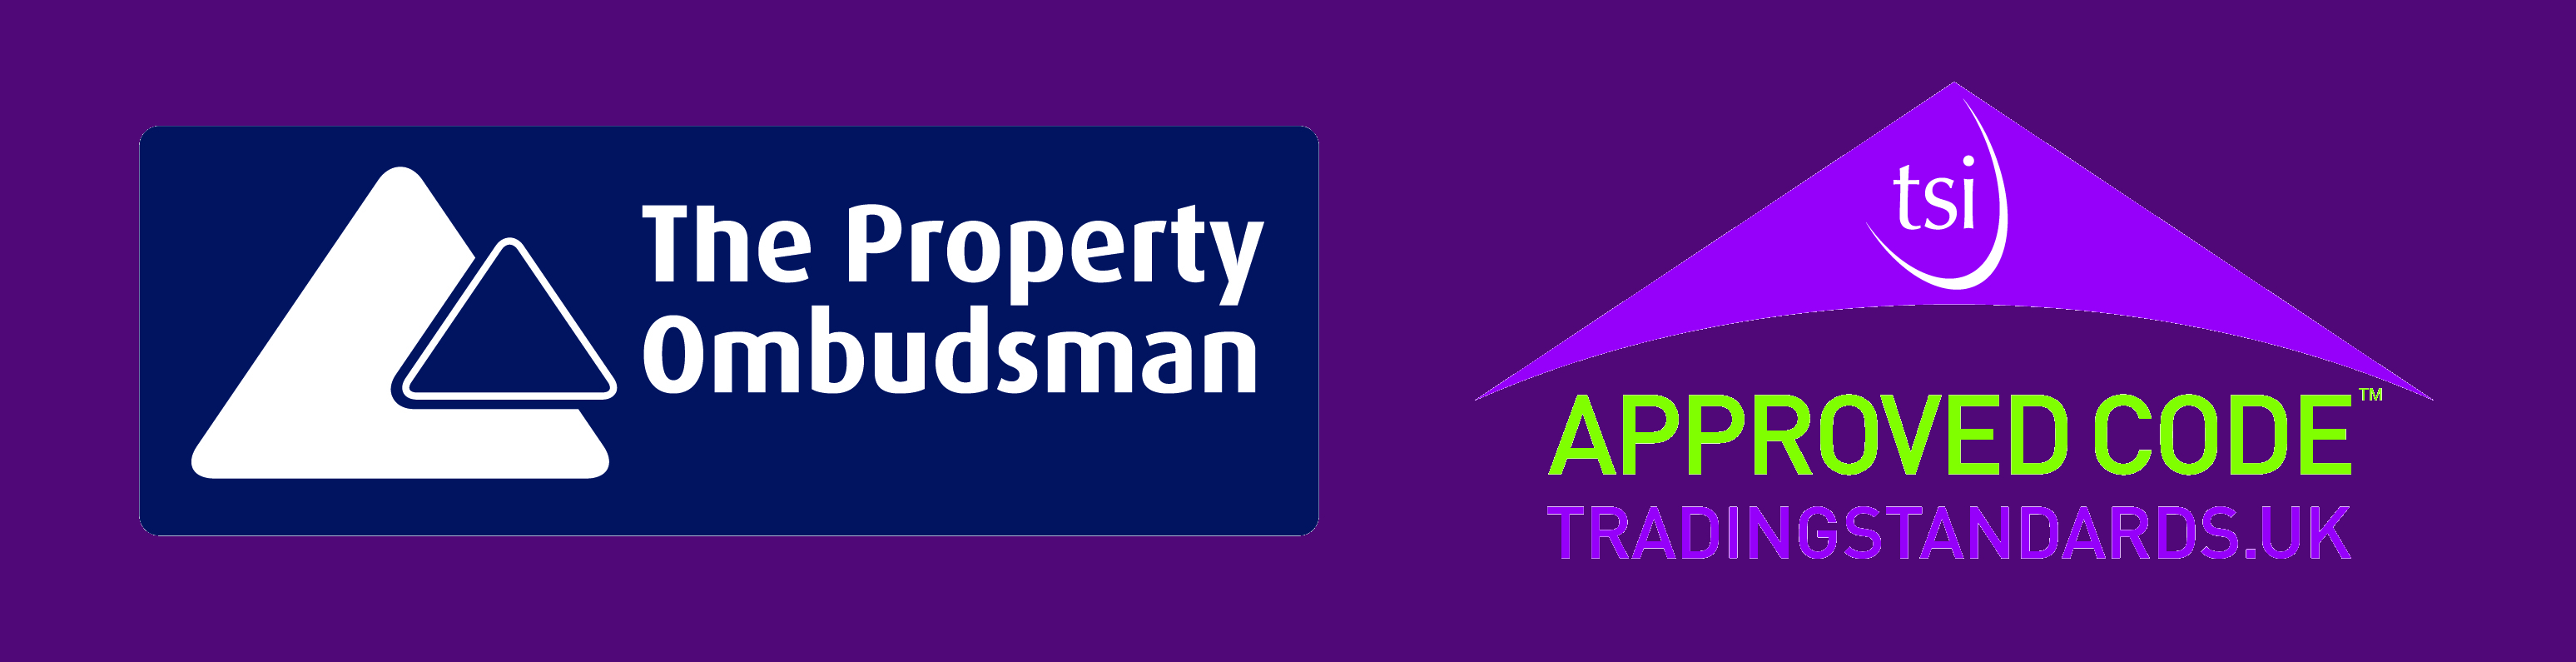 Fairway Properties are a member of The Property Ombudsman